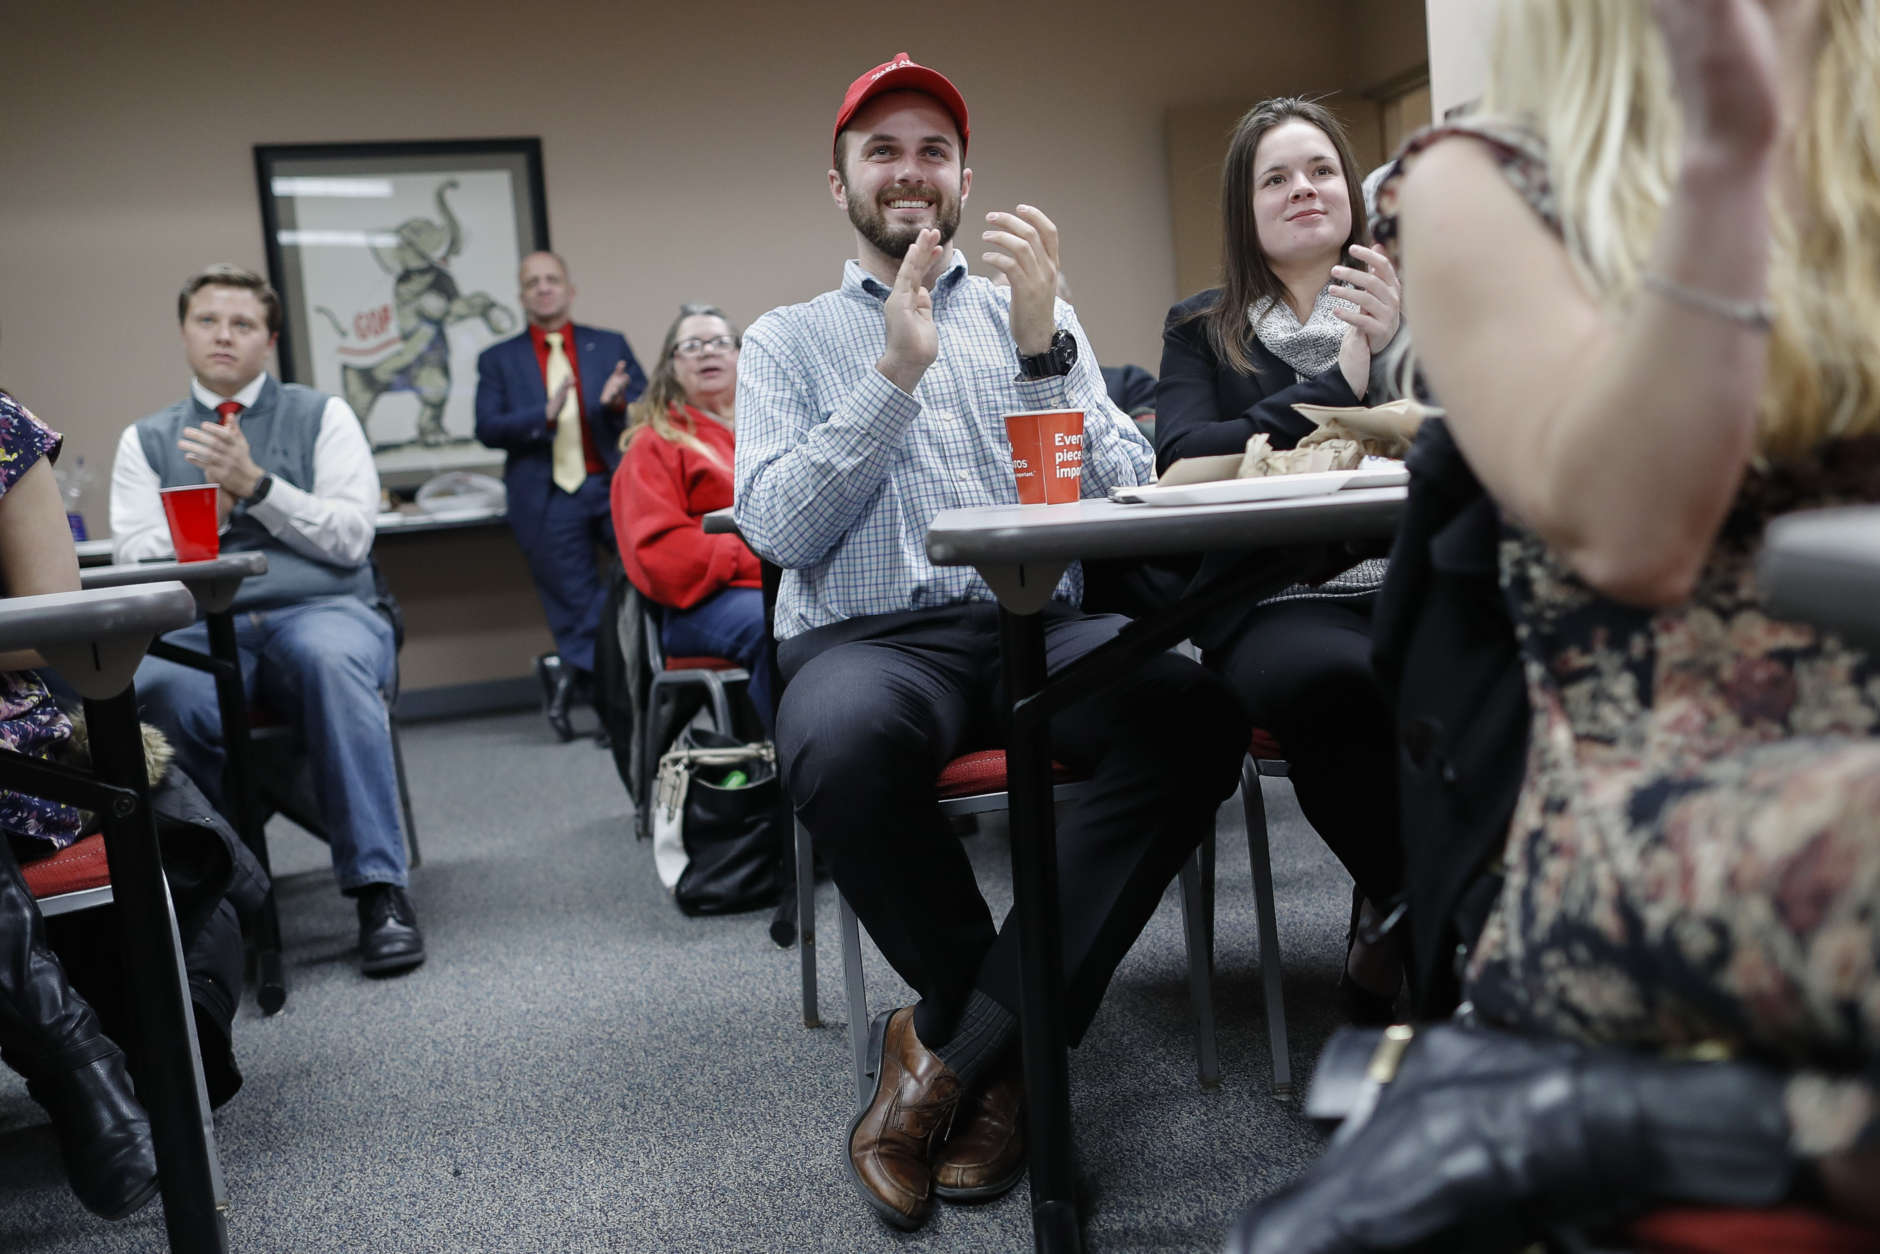 Supporters applaud as they watch President Donald Trump speak at a State of the Union watch party hosted by the Hamilton County Republican Party, Tuesday, Jan. 30, 2018, in Cincinnati. (AP Photo/John Minchillo)